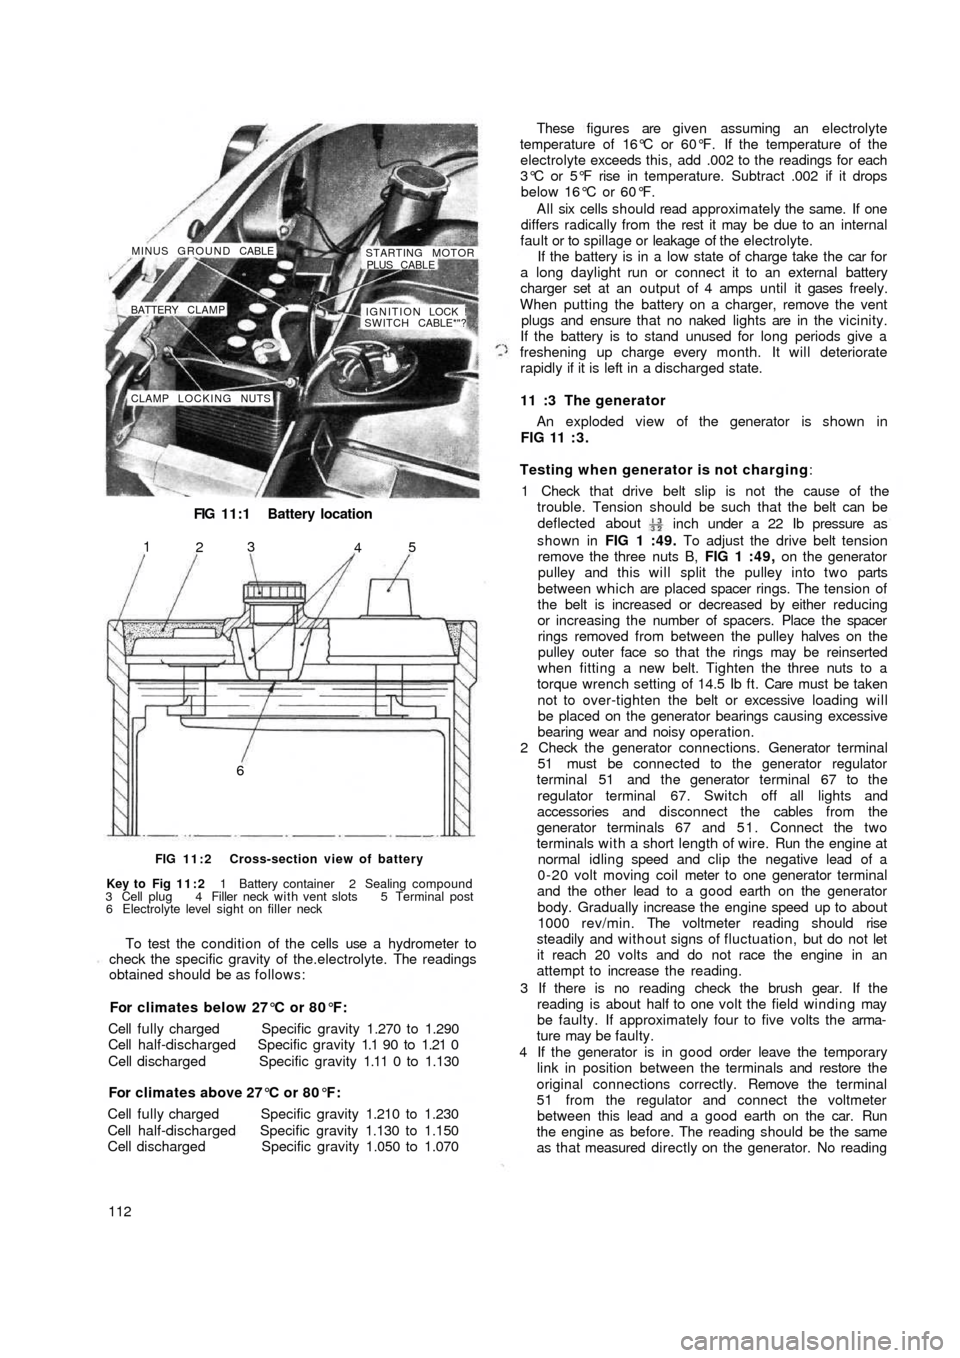 FIAT 500 1957 1.G Workshop Manual FIG 11:1 Battery location
CLAMP LOCKING NUTSIGNITION LOCK !
SWITCH CABLE*"? BATTERY CLAMP MINUS GROUND CABLE
STARTING MOTOR
PLUS CABLE
65
4 3
2 1
FIG 11:2 Cross-section view of battery
Key to  Fig  11